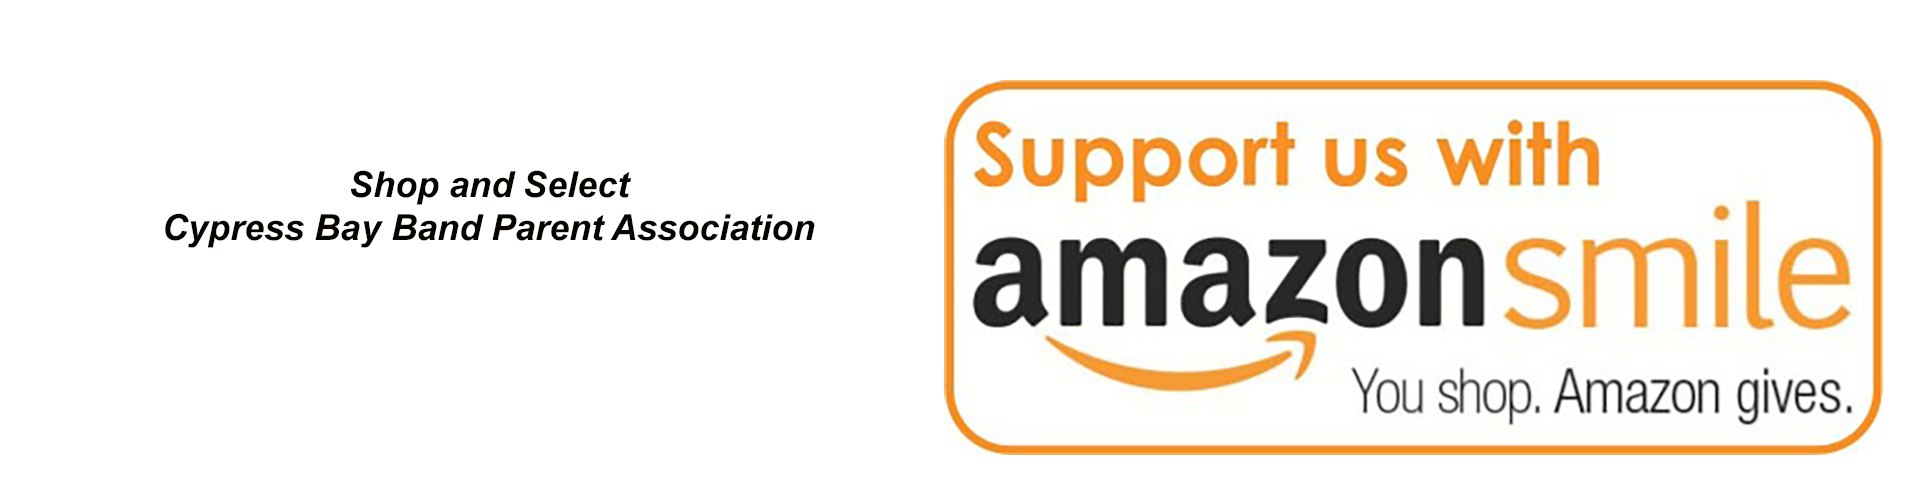 Shop with Amazon and Help our Band!